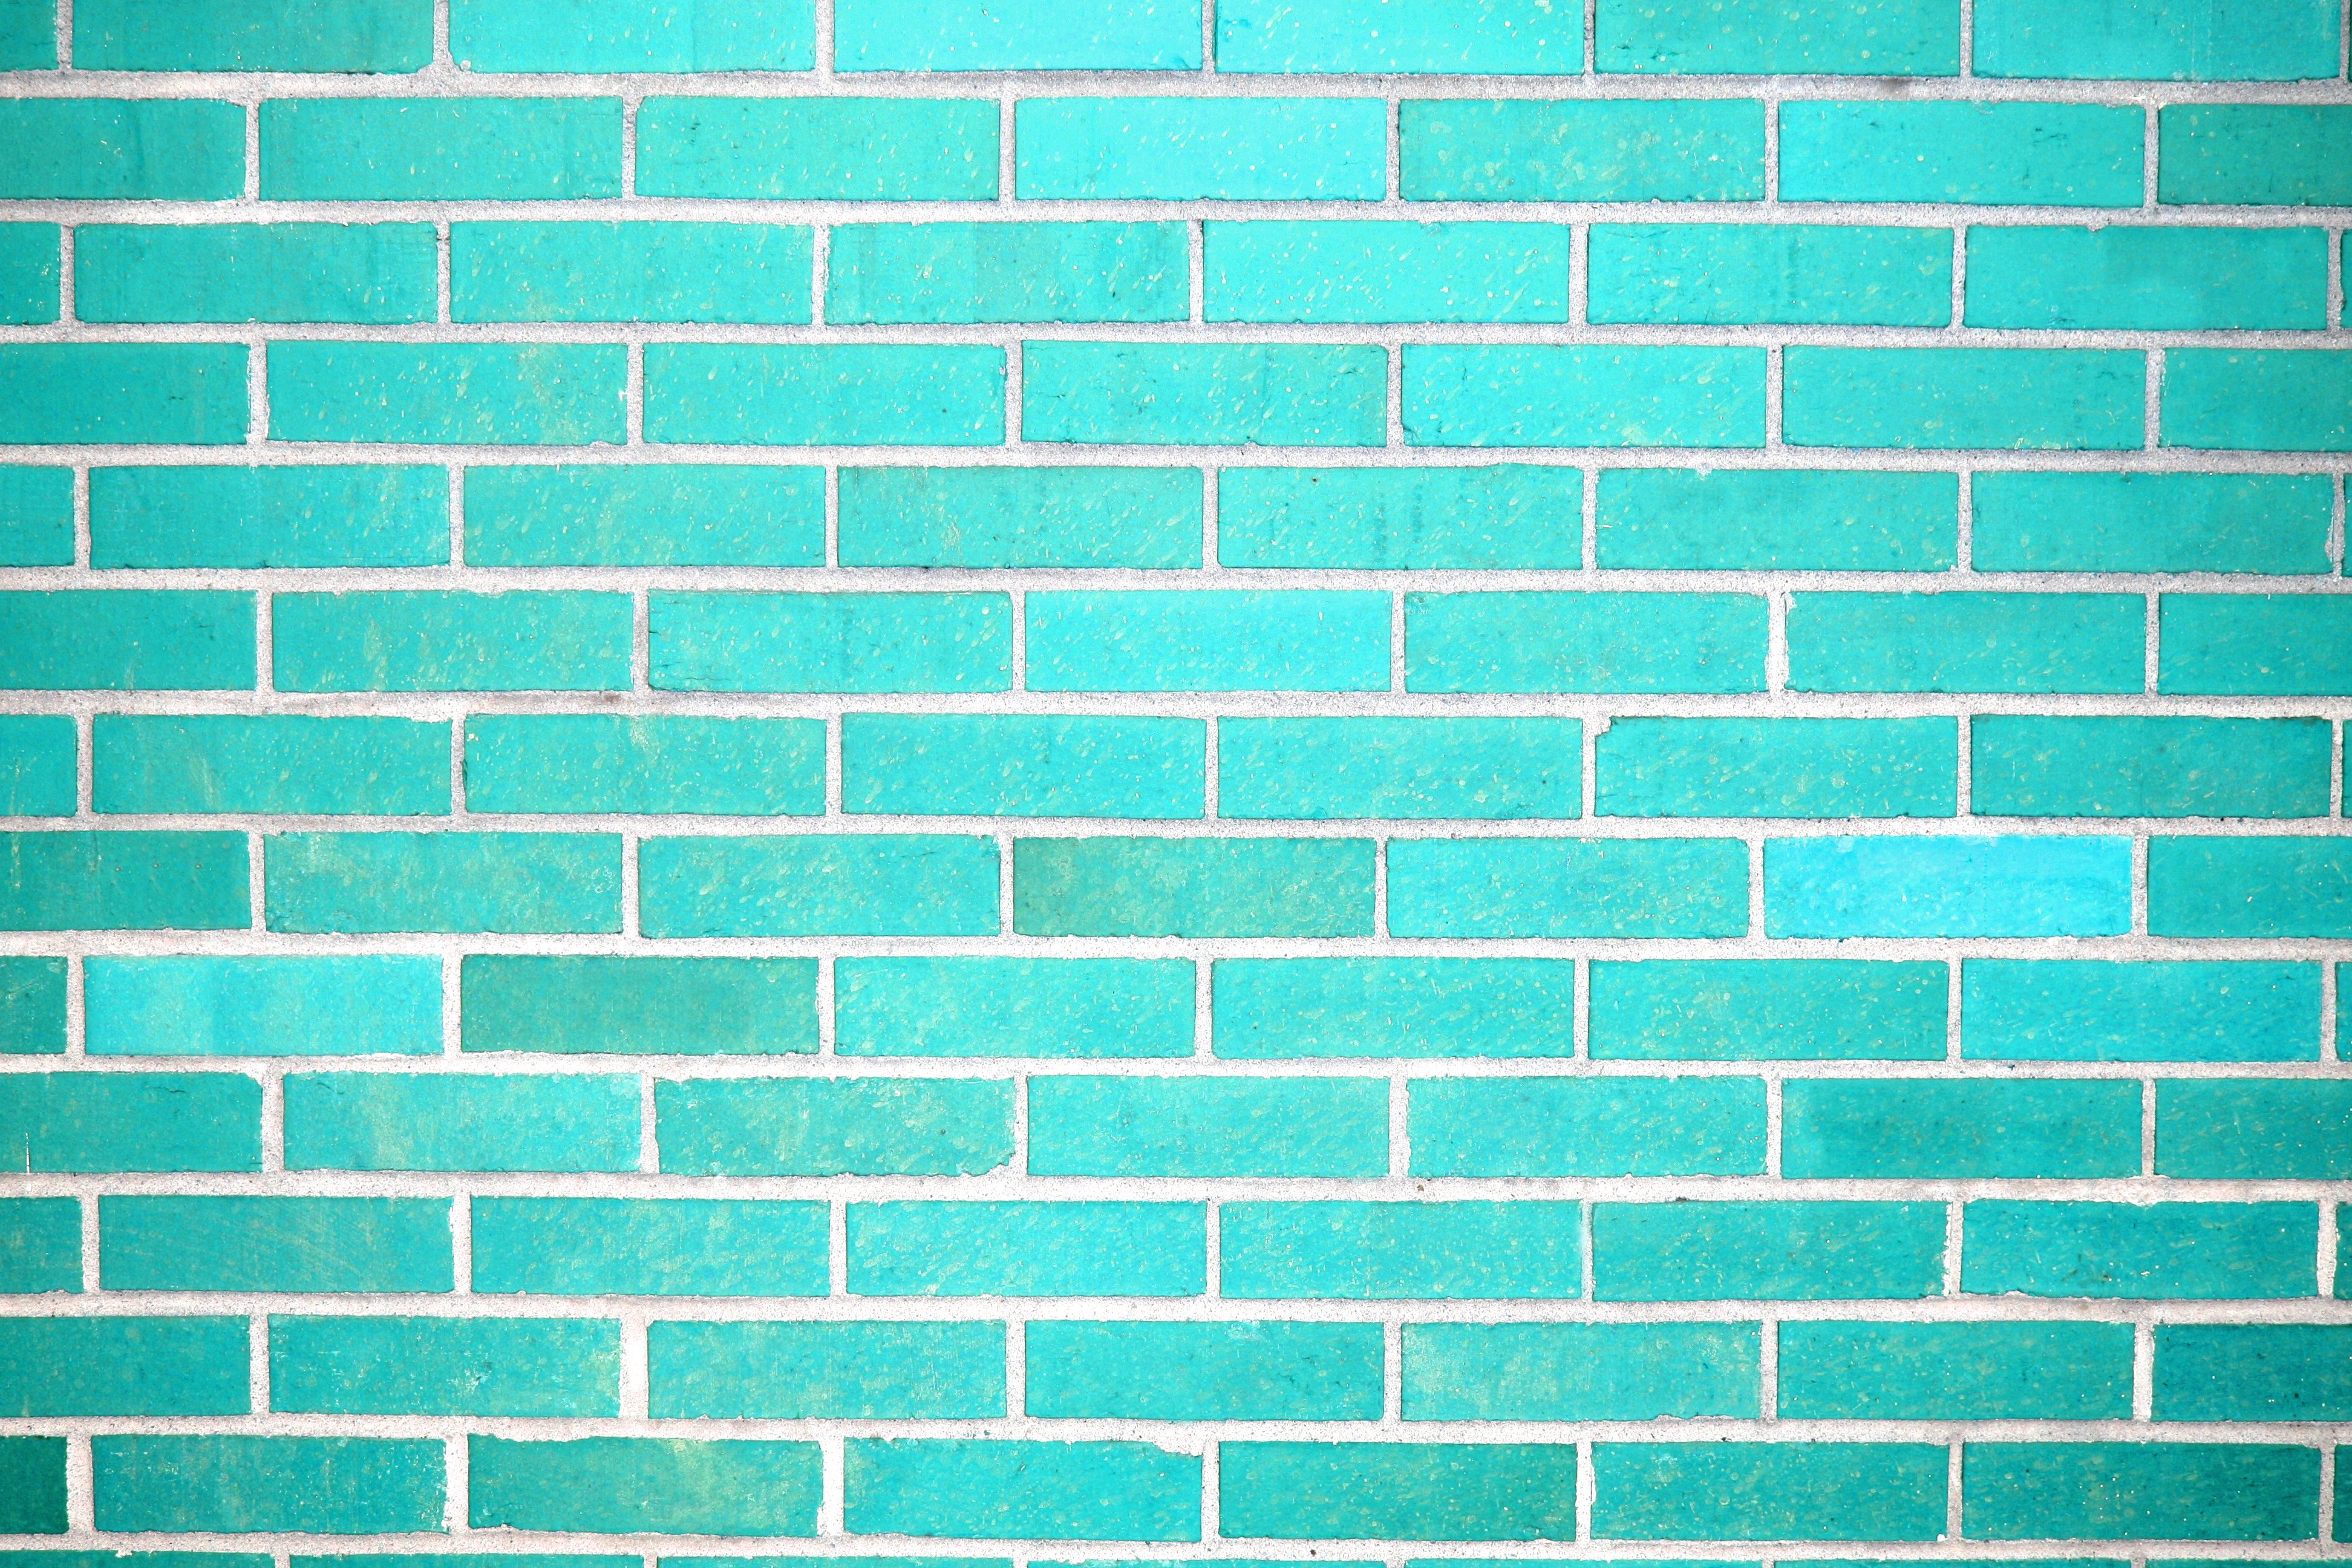 Teal Brick Wall Texture Picture | Free Photograph | Photos Public Domain